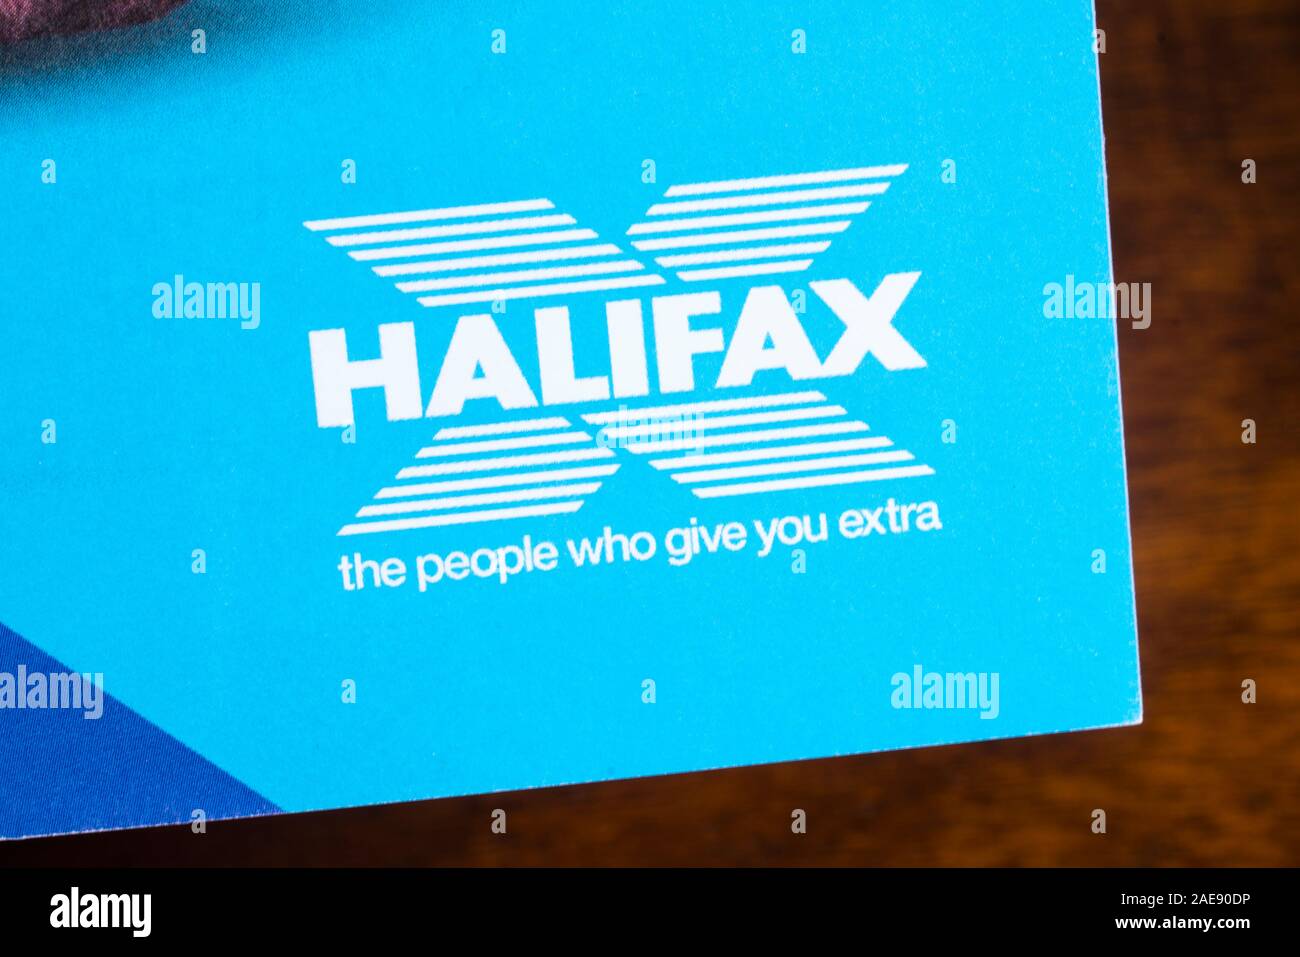 London, UK - December 3rd 2019: Close-up of the Halifax bank logo, pictured on an information booklet. Stock Photo